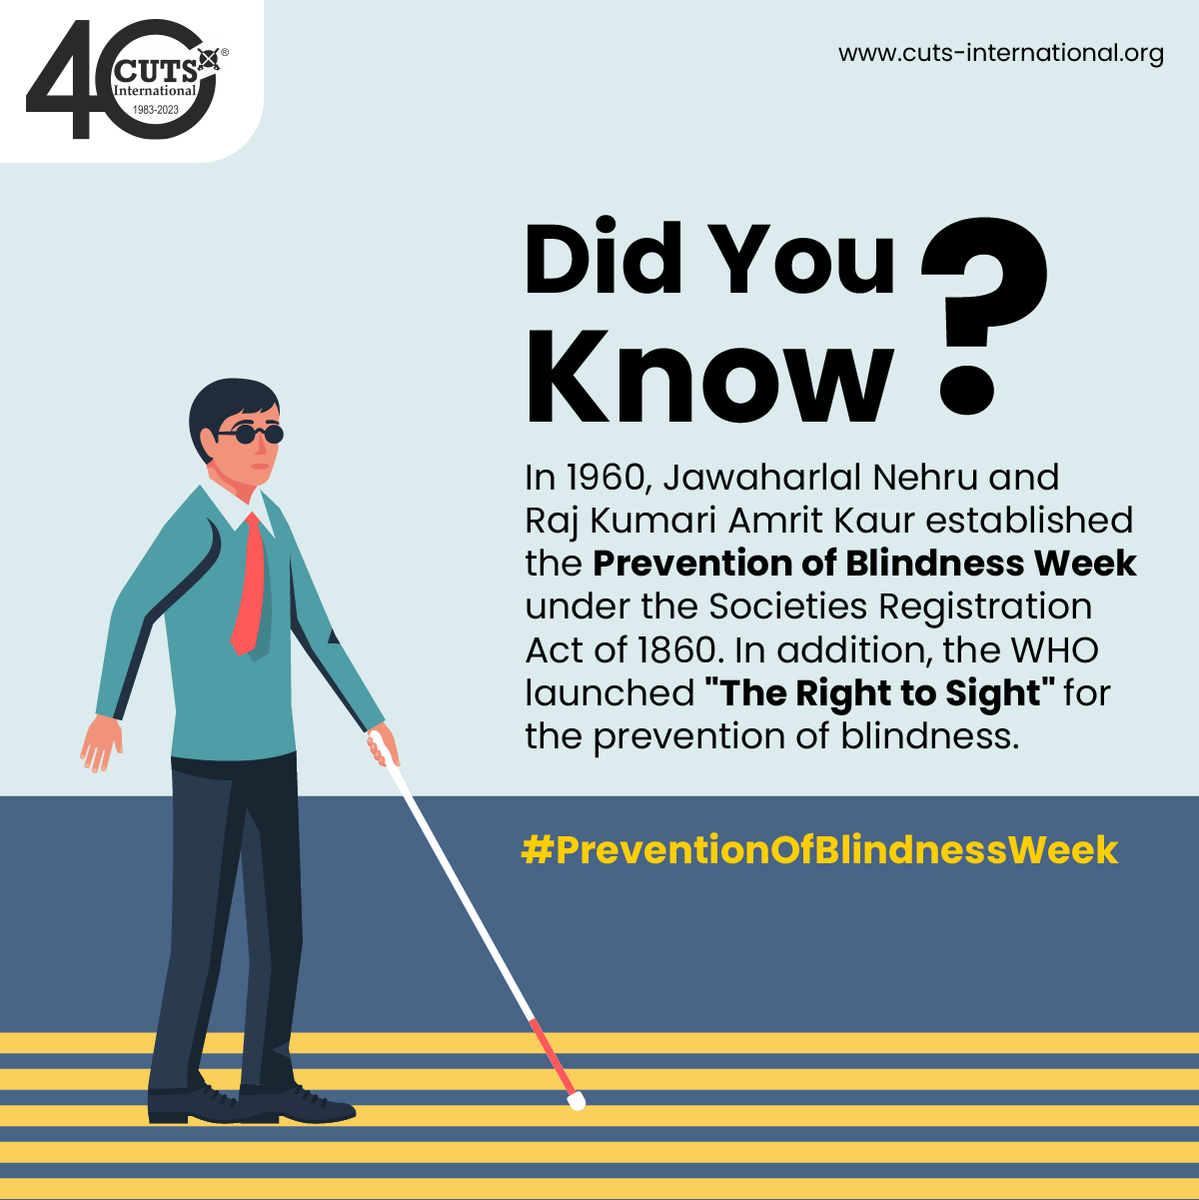 Celebrate Prevention of Blindness Week by educating yourself and others about the importance of eye care.

#VisionForAll #CUTS #CUTSInternational #PreventionOfBlindnessWeek

@psm_cuts @bc_cuts @gcheriyan @drpreetivats @ujjwal1841 @SureshSinghPar5 @GauharMehmood